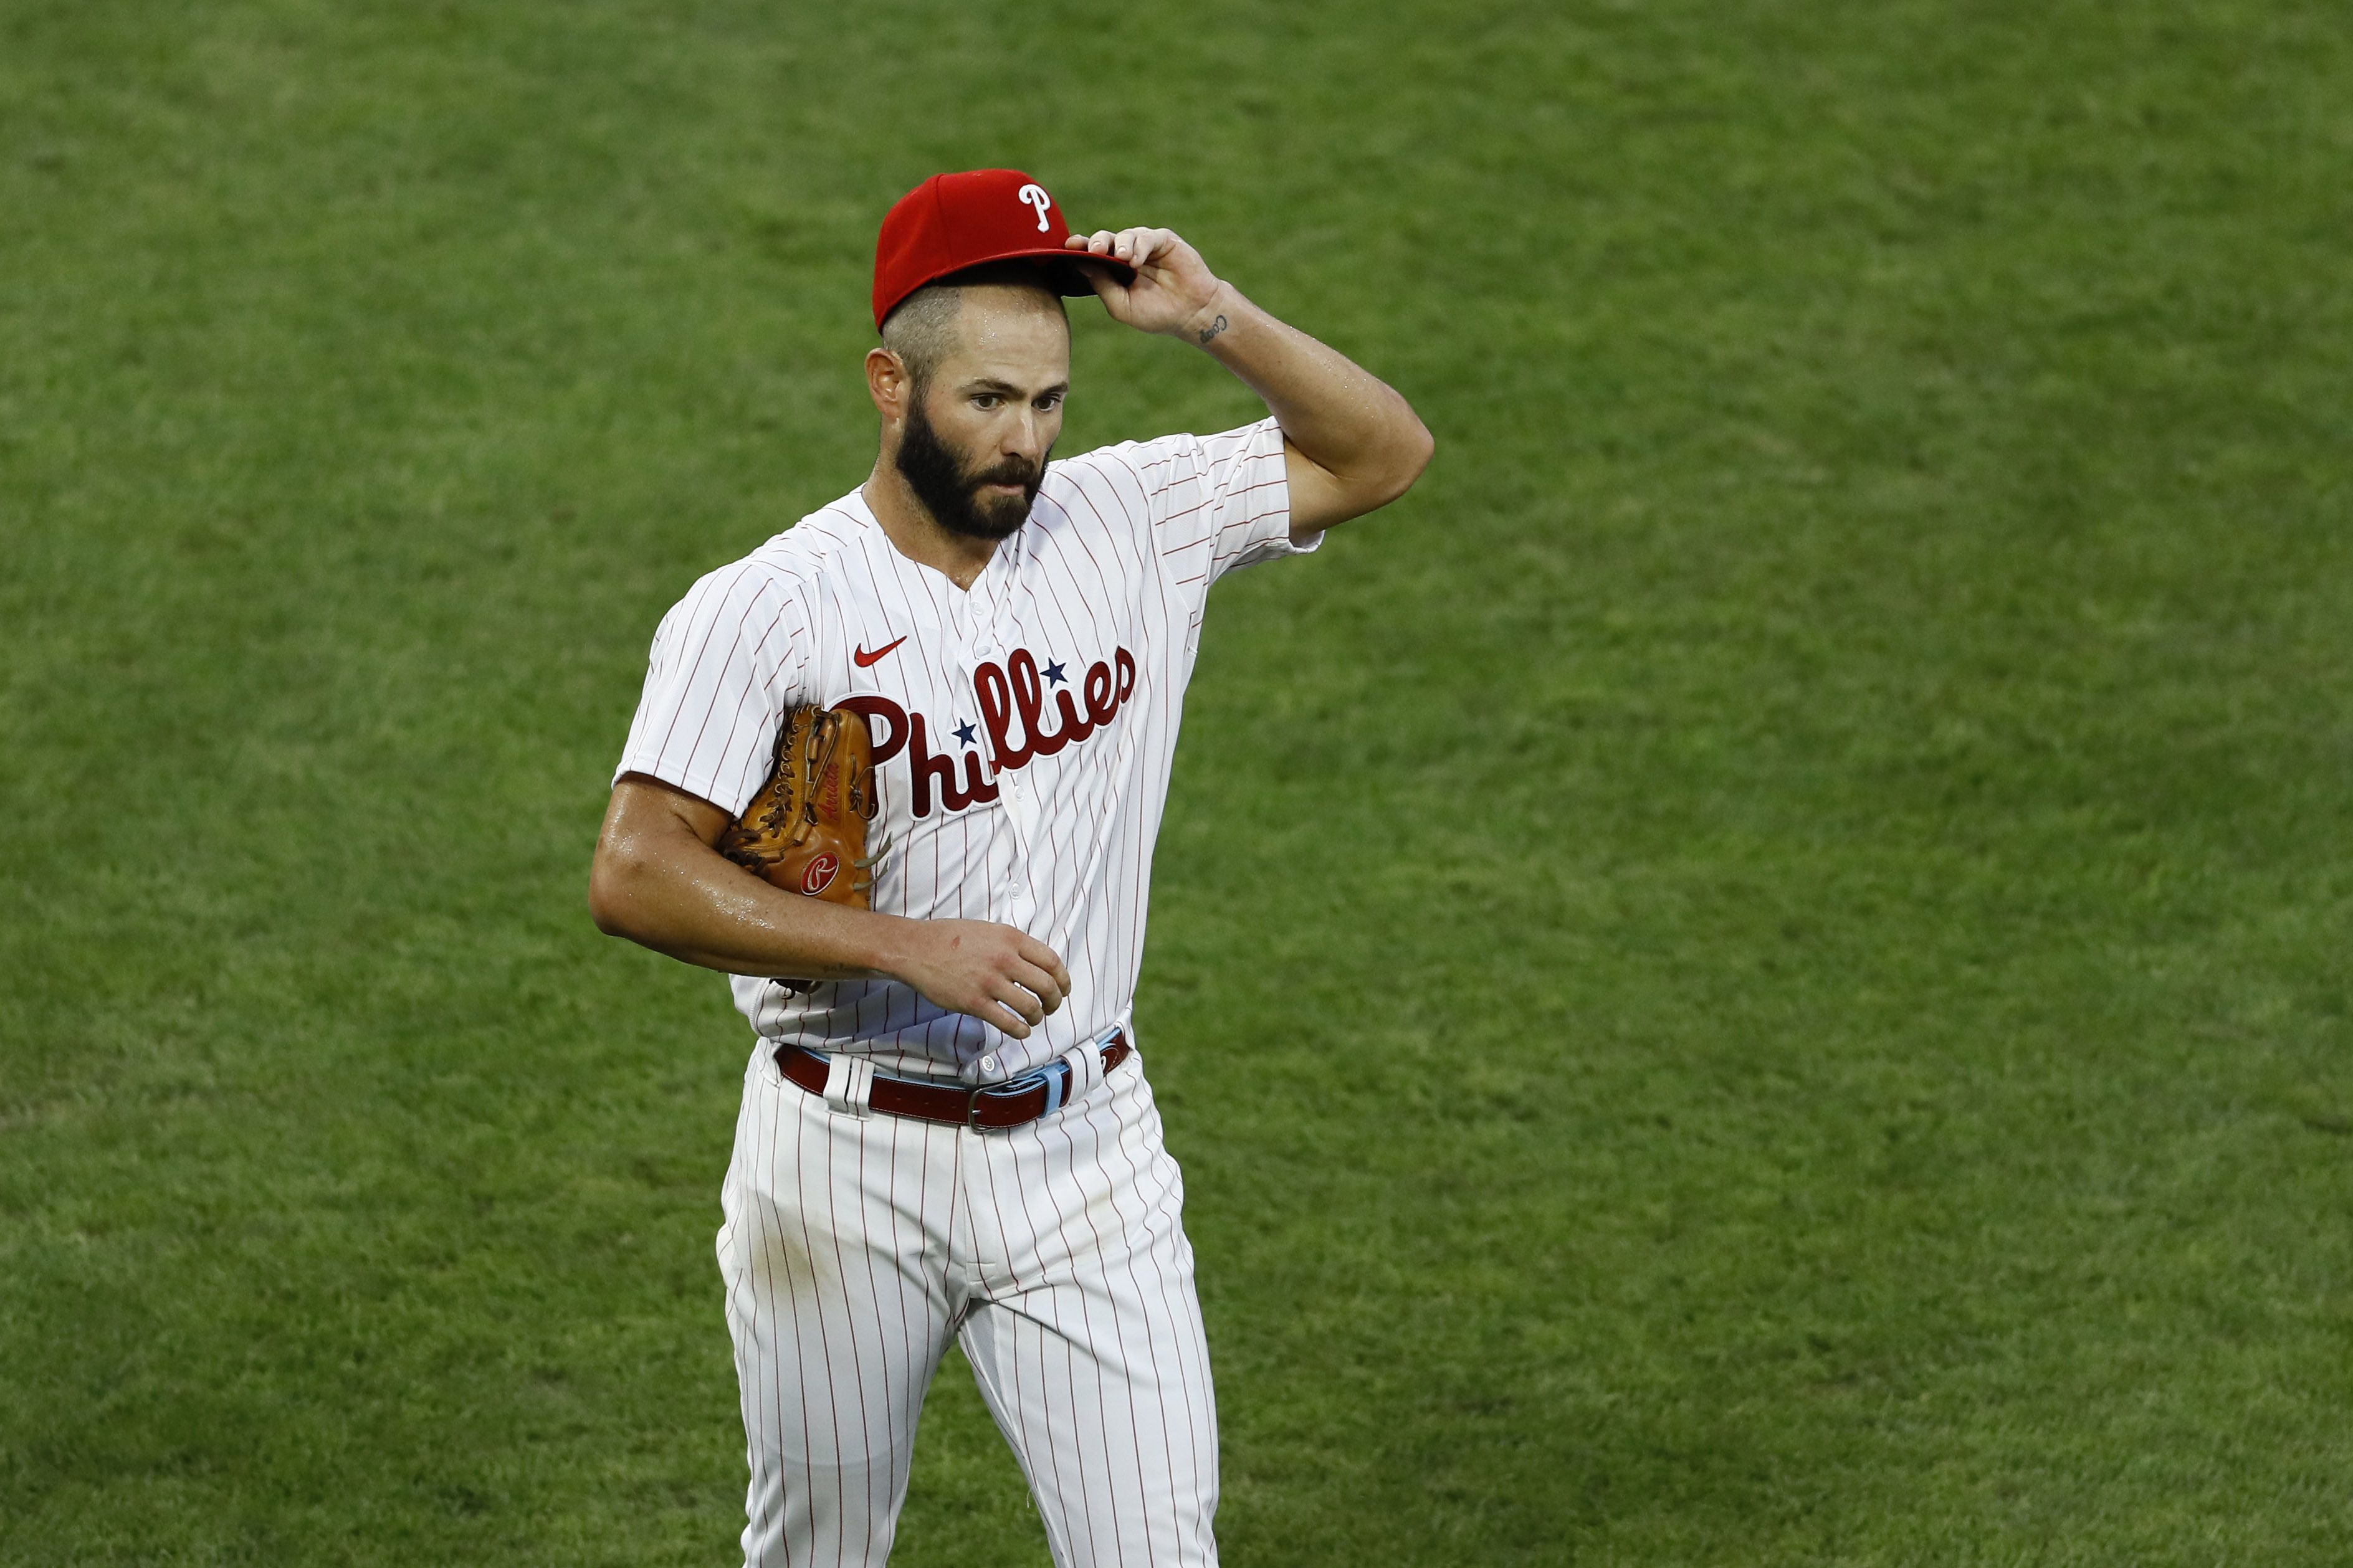 Phillies will face Jake Arrieta on Tuesday as the former Phillie